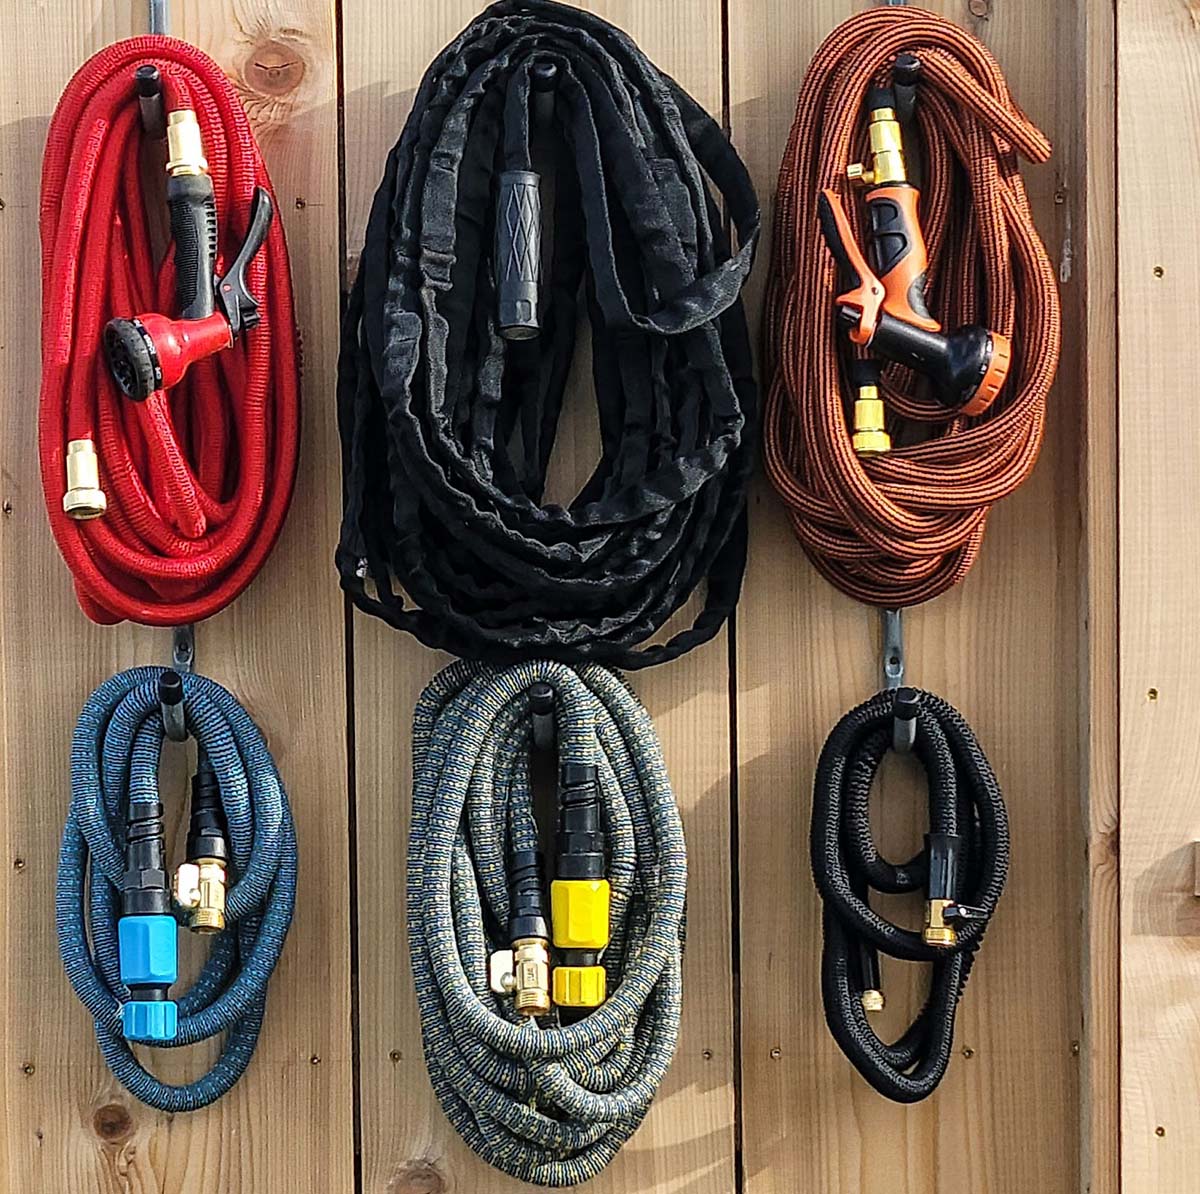 The Best Expandable Hose Options coiled and hanging on a wooden fence